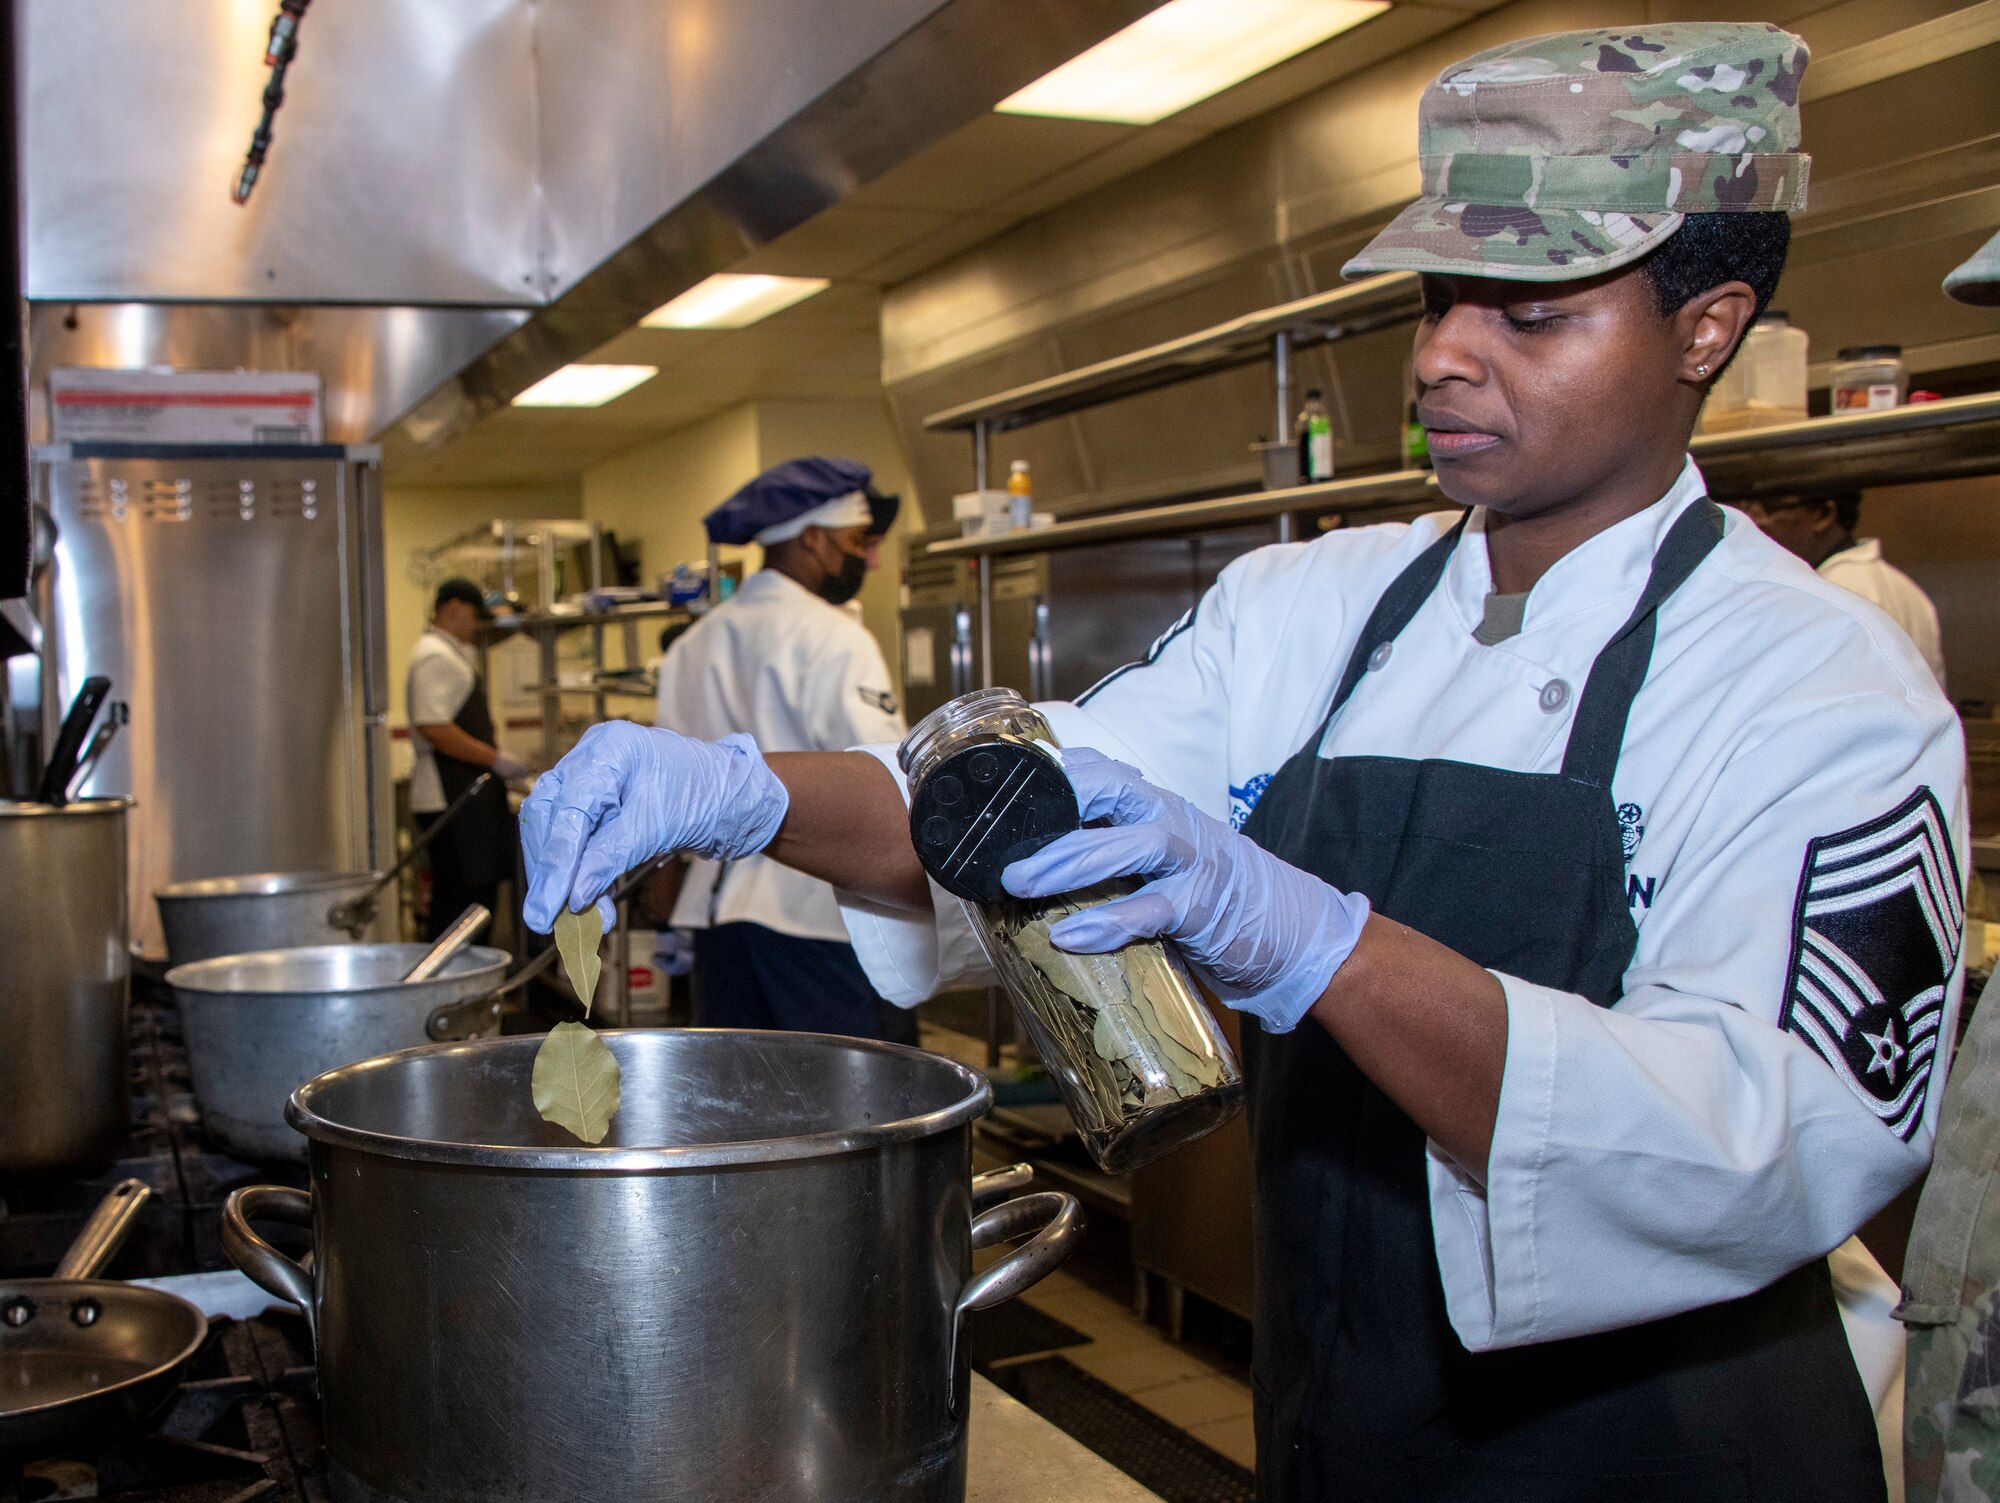 U.S. Air Force Chief Master Sgt. Andrea Conlan, 60th Force Support Squadron senior enlisted leader, adds bay leaves to flavor a dish at Travis Air Force Base, California, March 23, 2022. The 60th Mission Support Group Monarch Dining Facility hosted a cooking competition showcasing skill, speed and ingenuity. Teams of four competed to transform mystery ingredients into the main course and dessert dishes to present to a panel of judges. (U.S. Air Force photo by Heide Couch)